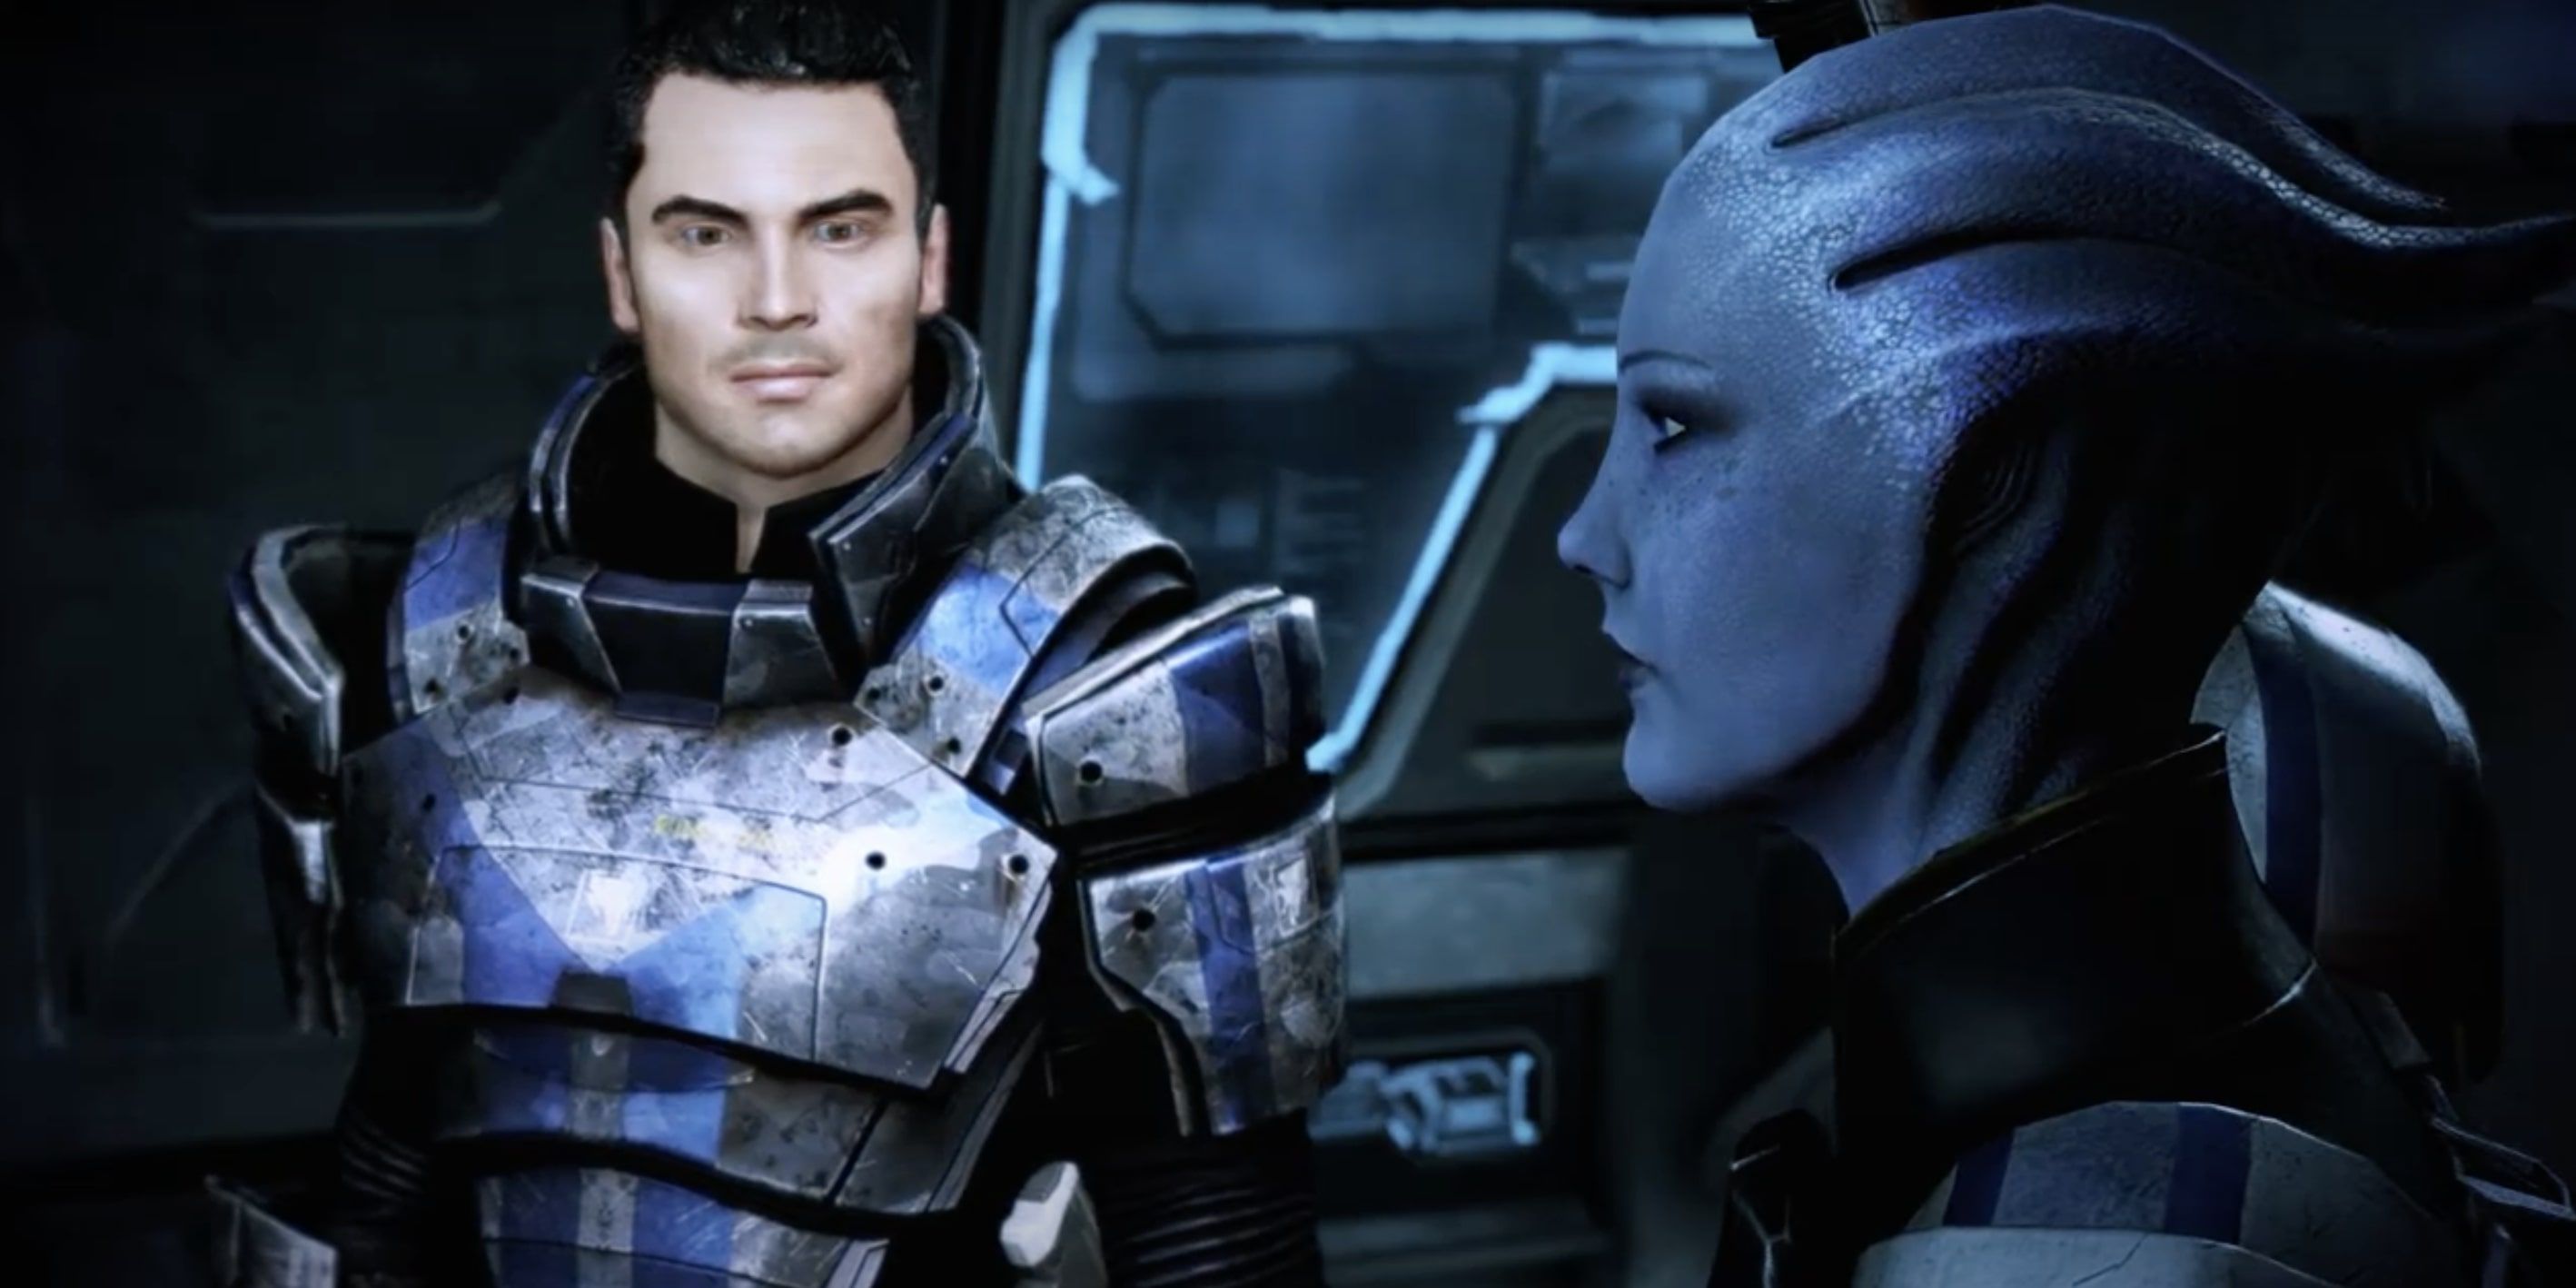 Mass Effect 3 Kaidan and Liara Chatting on Shuttle to Eden Prime